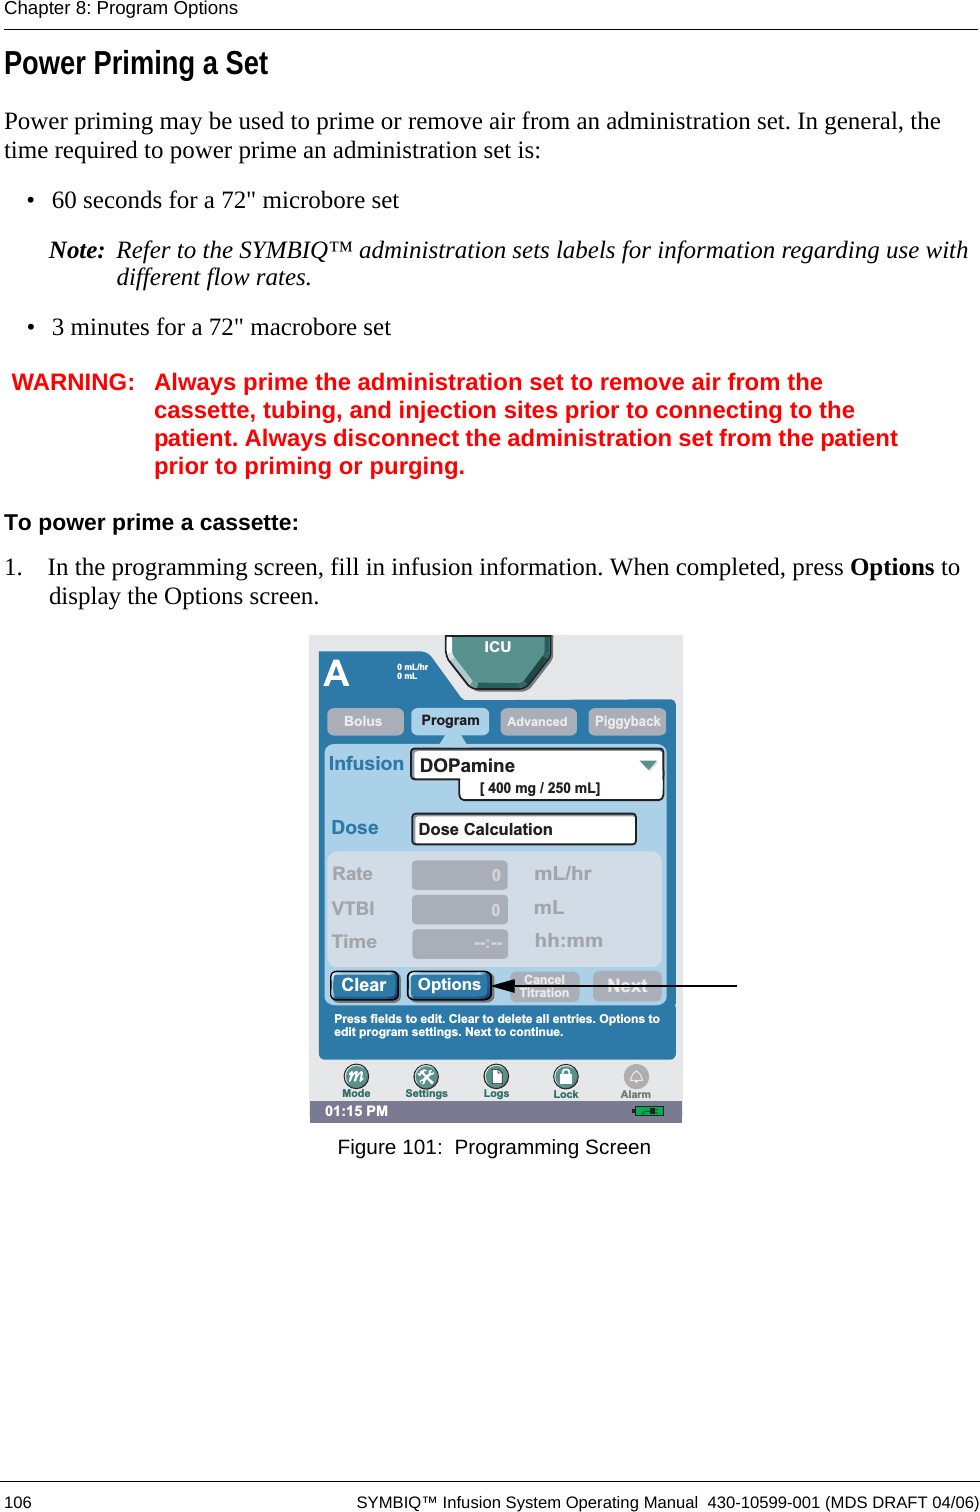  106 SYMBIQ™ Infusion System Operating Manual  430-10599-001 (MDS DRAFT 04/06)Chapter 8: Program OptionsPower Priming a SetPower priming may be used to prime or remove air from an administration set. In general, the time required to power prime an administration set is:• 60 seconds for a 72&quot; microbore setNote: Refer to the SYMBIQ™ administration sets labels for information regarding use with different flow rates.• 3 minutes for a 72&quot; macrobore setWARNING: Always prime the administration set to remove air from the cassette, tubing, and injection sites prior to connecting to the patient. Always disconnect the administration set from the patient prior to priming or purging.To power prime a cassette:1.  In the programming screen, fill in infusion information. When completed, press Options to display the Options screen. Figure 101:  Programming Screen01:15 PMAProgramPiggybackRateDoseInfusionDose Calculation00--:--VTBITimemL/hrmLhh:mm[ 400 mg / 250 mL]DOPaminePress fields to edit. Clear to delete all entries. Options toedit program settings. Next to continue.BolusAdvancedICU0 mL/hr0mLNextOptionsClearSettings Logs LockModeCancelTitrationAlarm